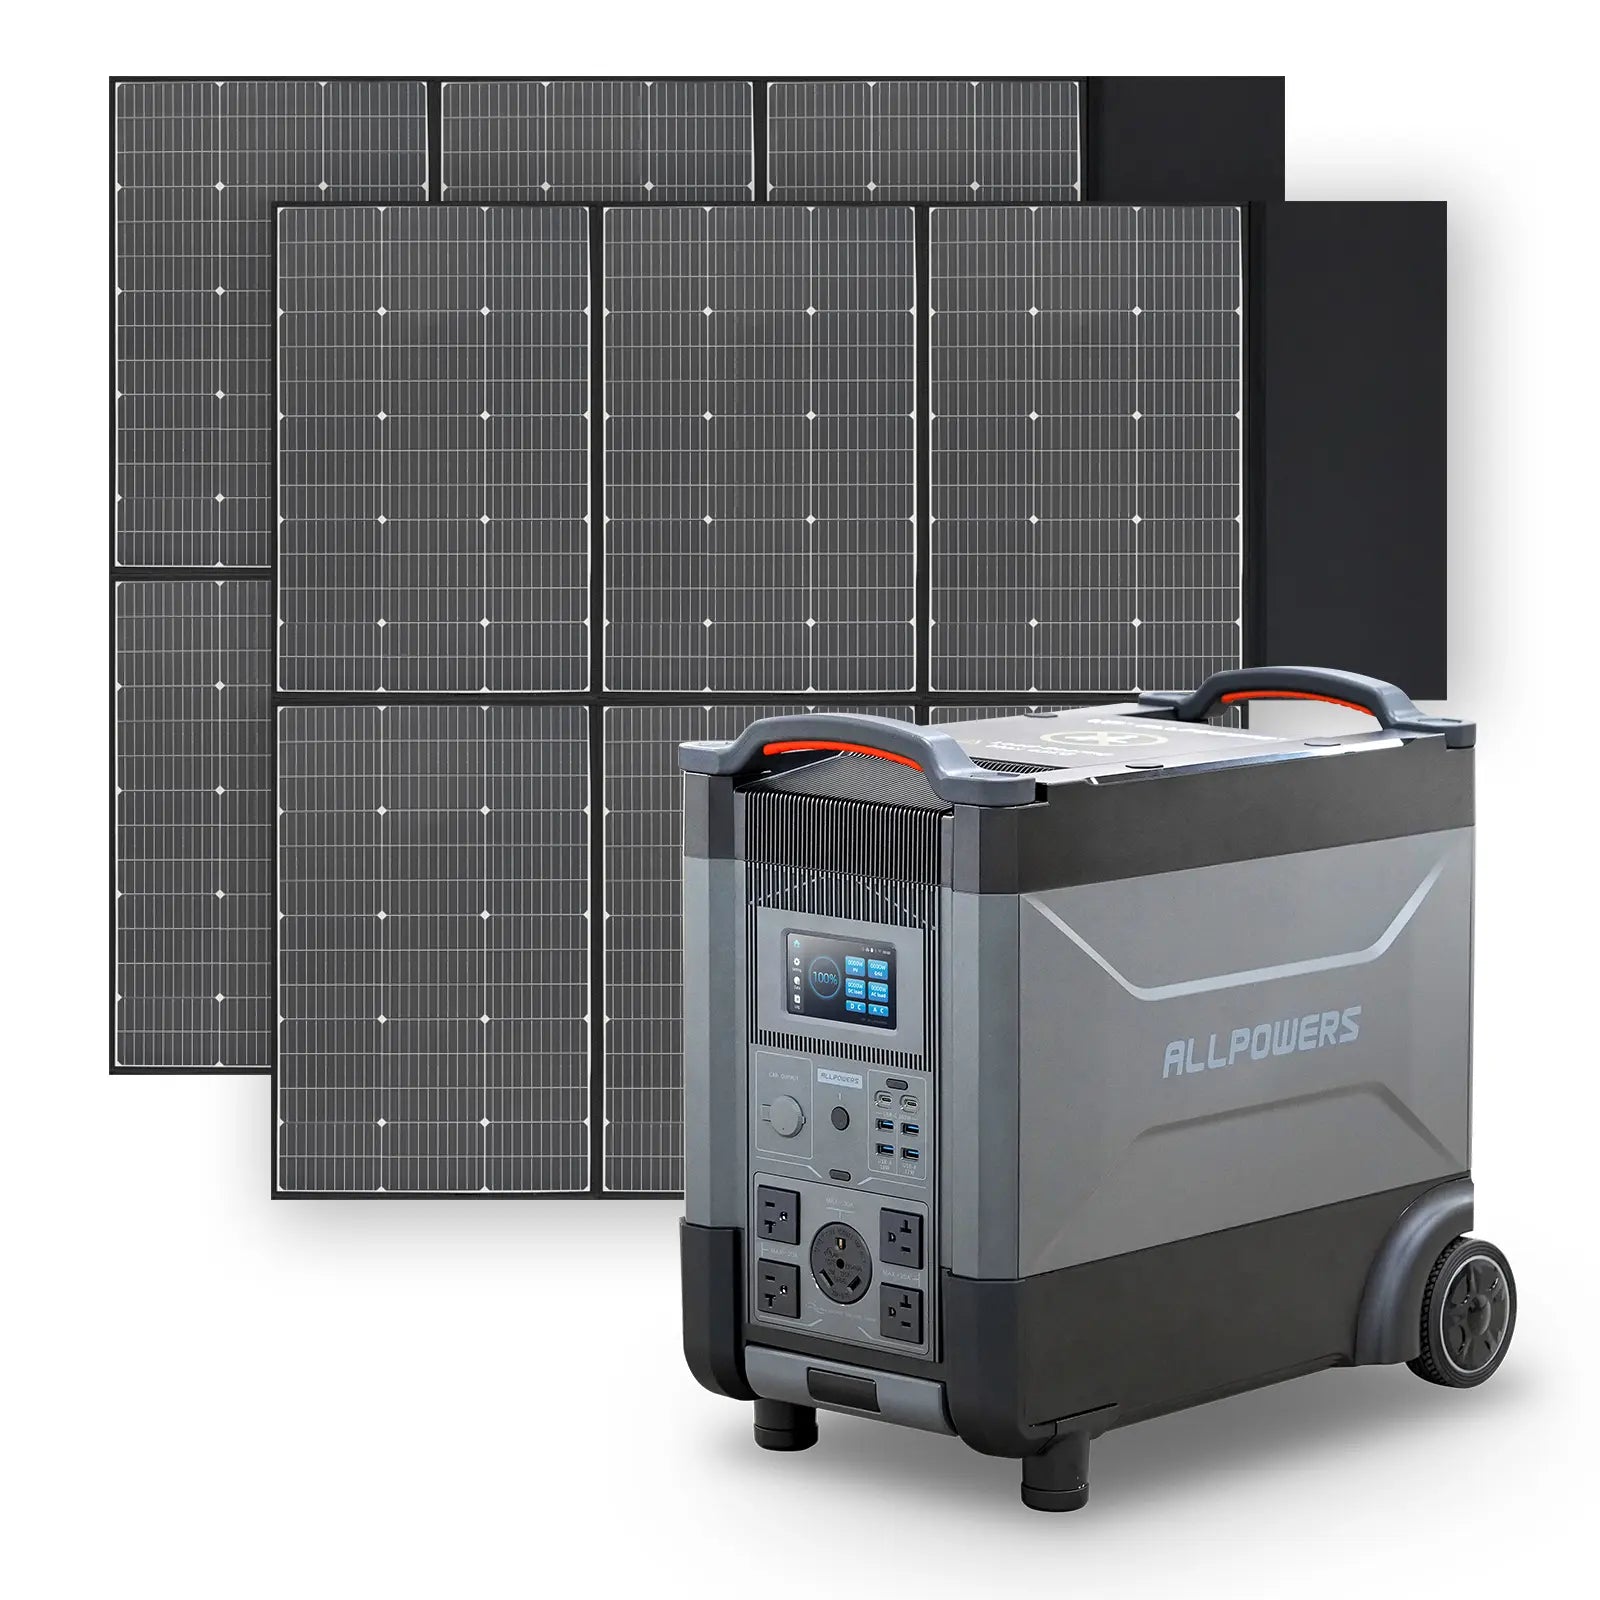 ALLPOWERS R4000 Portable Power Station 4000W 3600Wh (R4000 + 2 x SP039 600W Solar Panel)